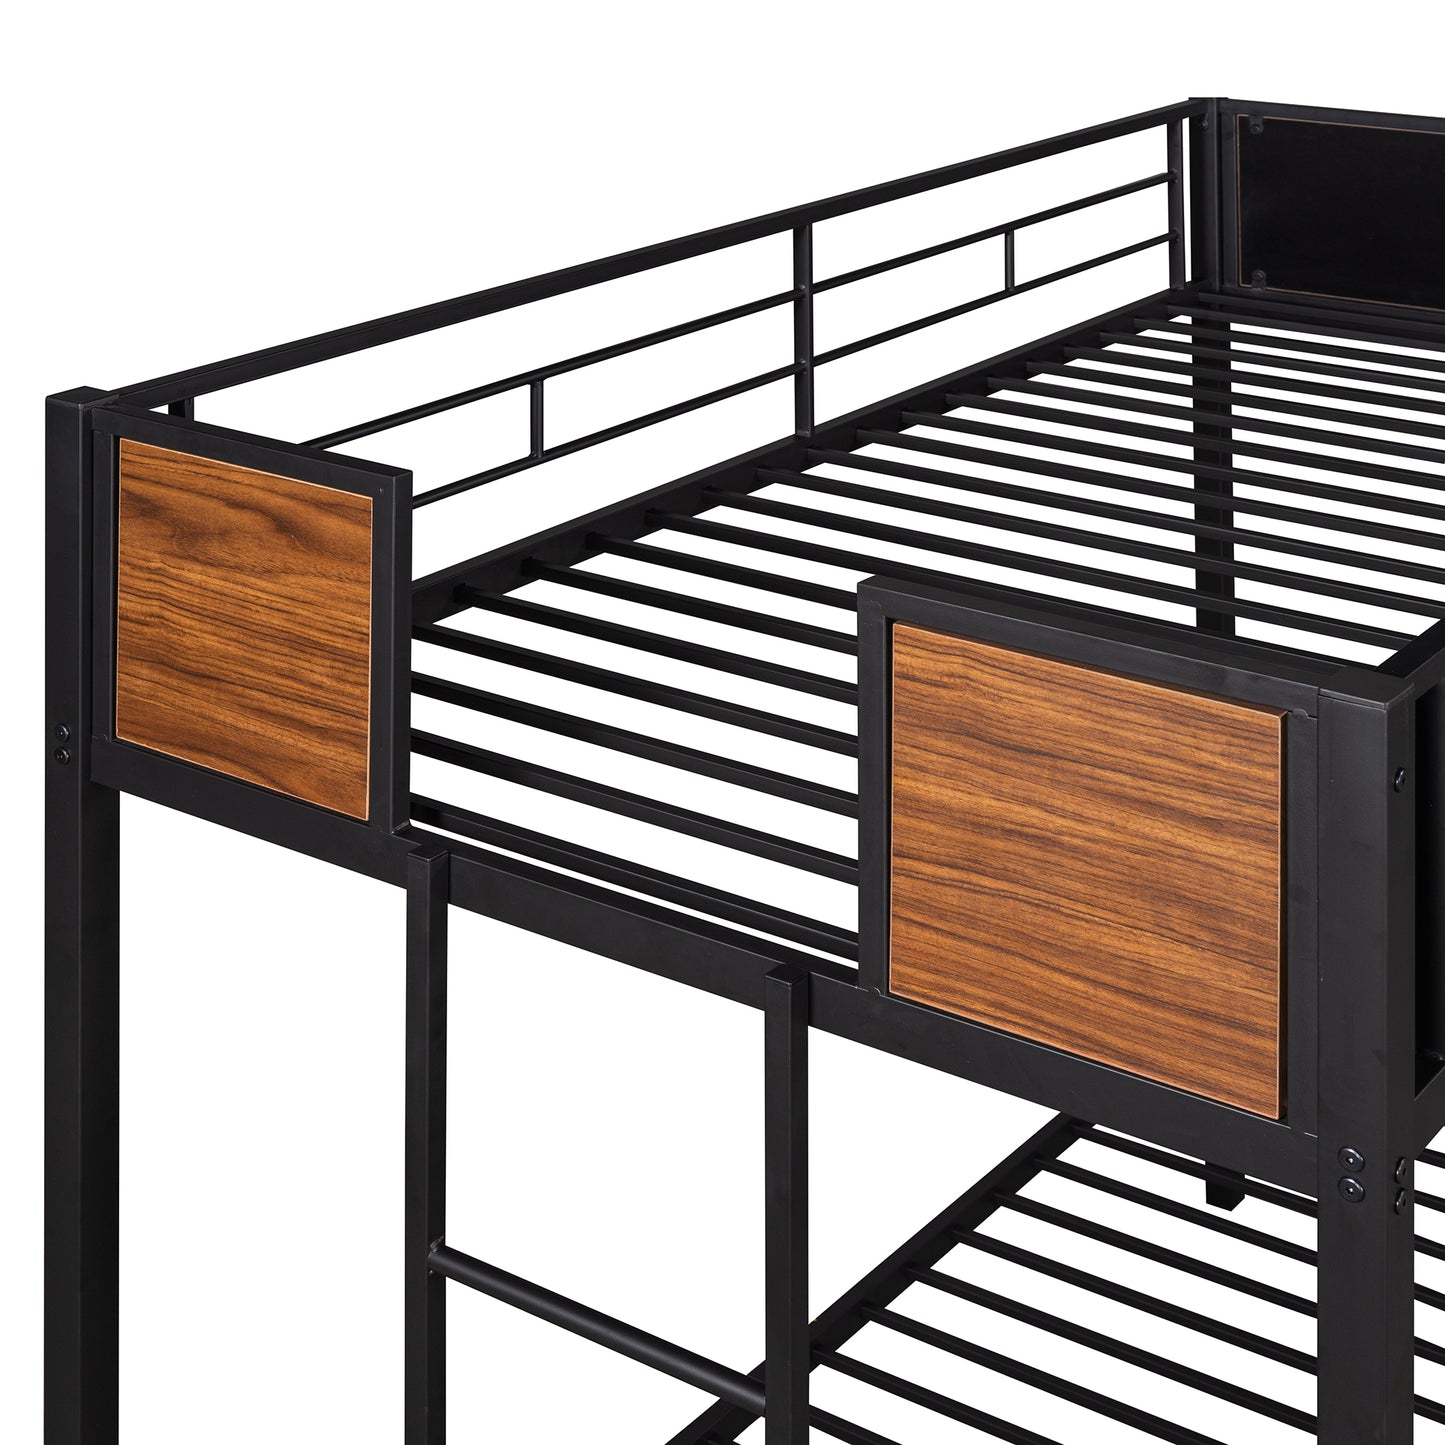 Twin-over-twin bunk bed modern style steel frame bunk bed with safety rail, built-in ladder for bedroom, dorm, boys, girls, adults